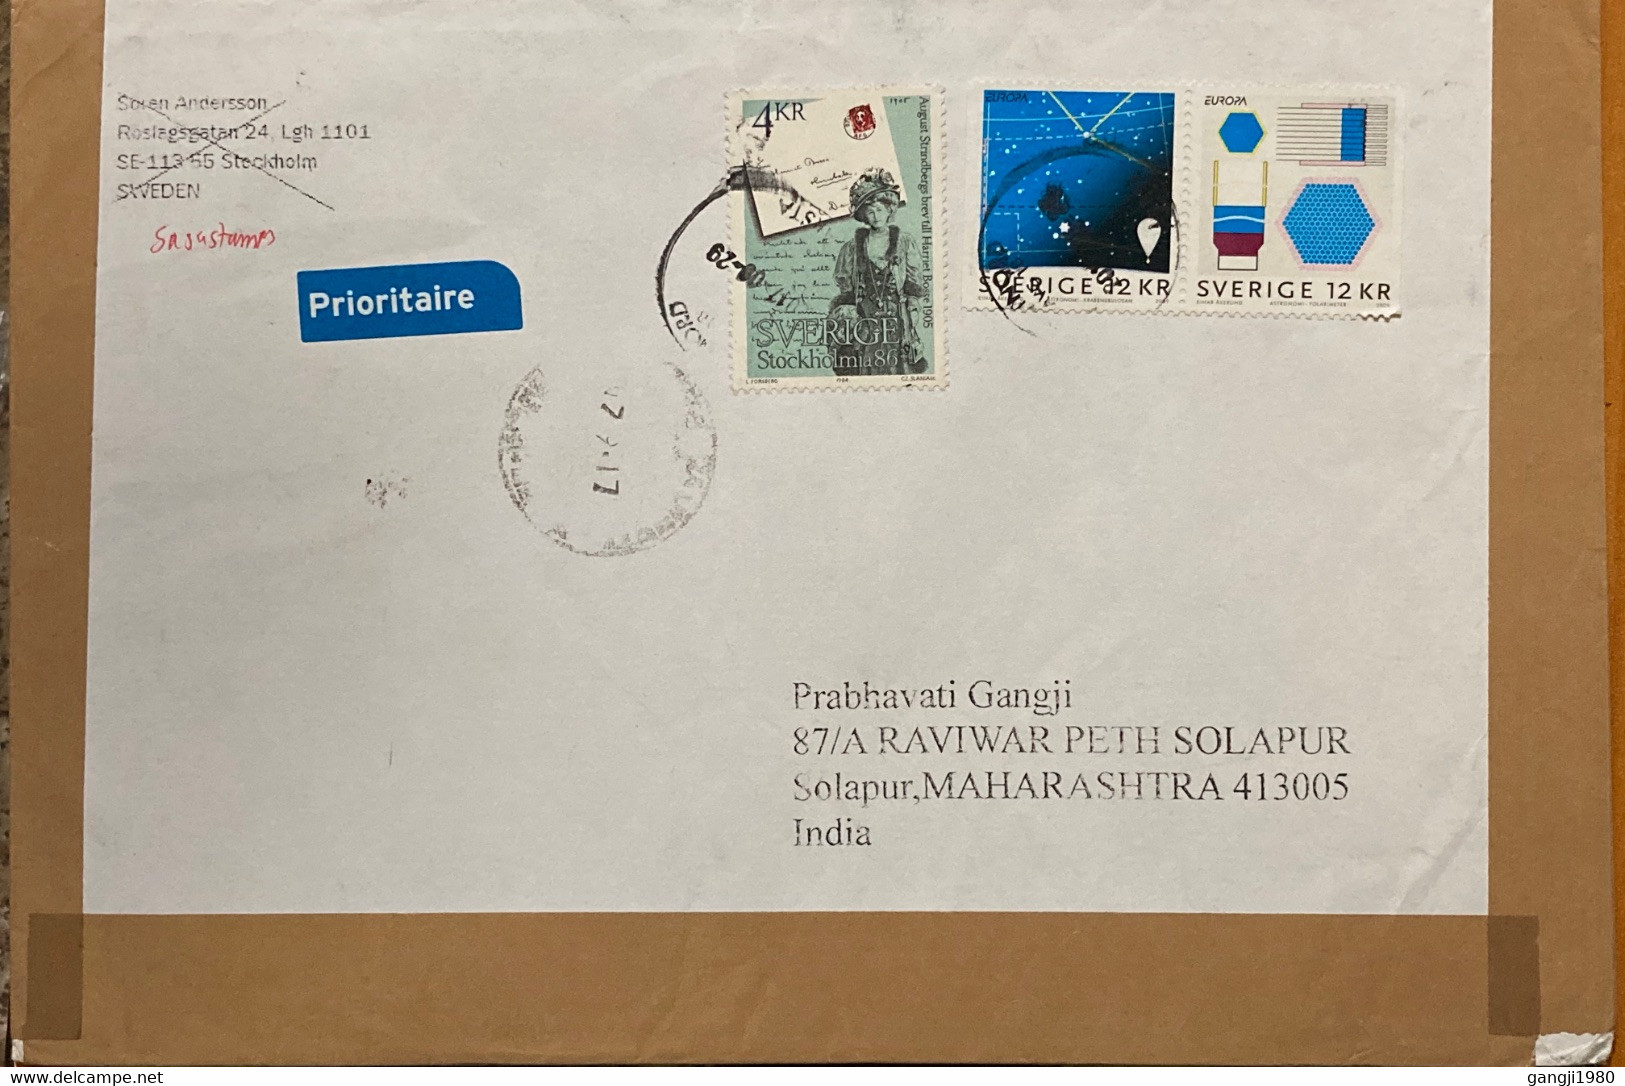 SWEDEN 2009, EUROPA SE-TENENT ,COVER ON STAMP ! STOCKHOLMIA 86 ,3 STAMP USED COVER TO INDIA - Cartas & Documentos